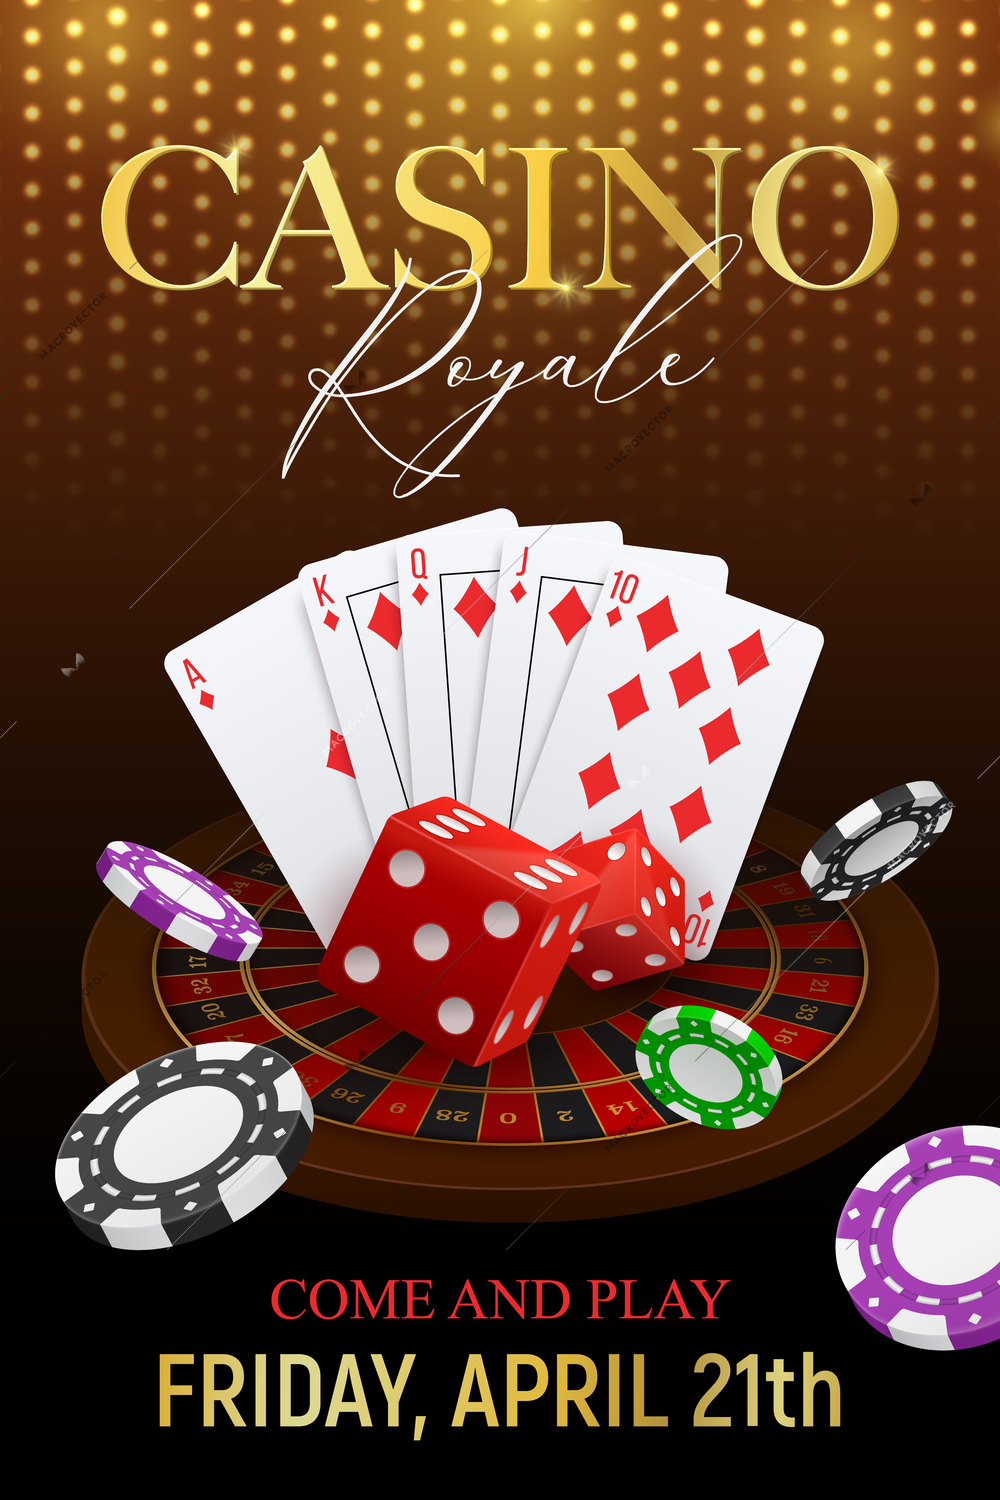 Casino poker club event announcement invitation realistic festive background poster with cards dice chips golden font vector illustration